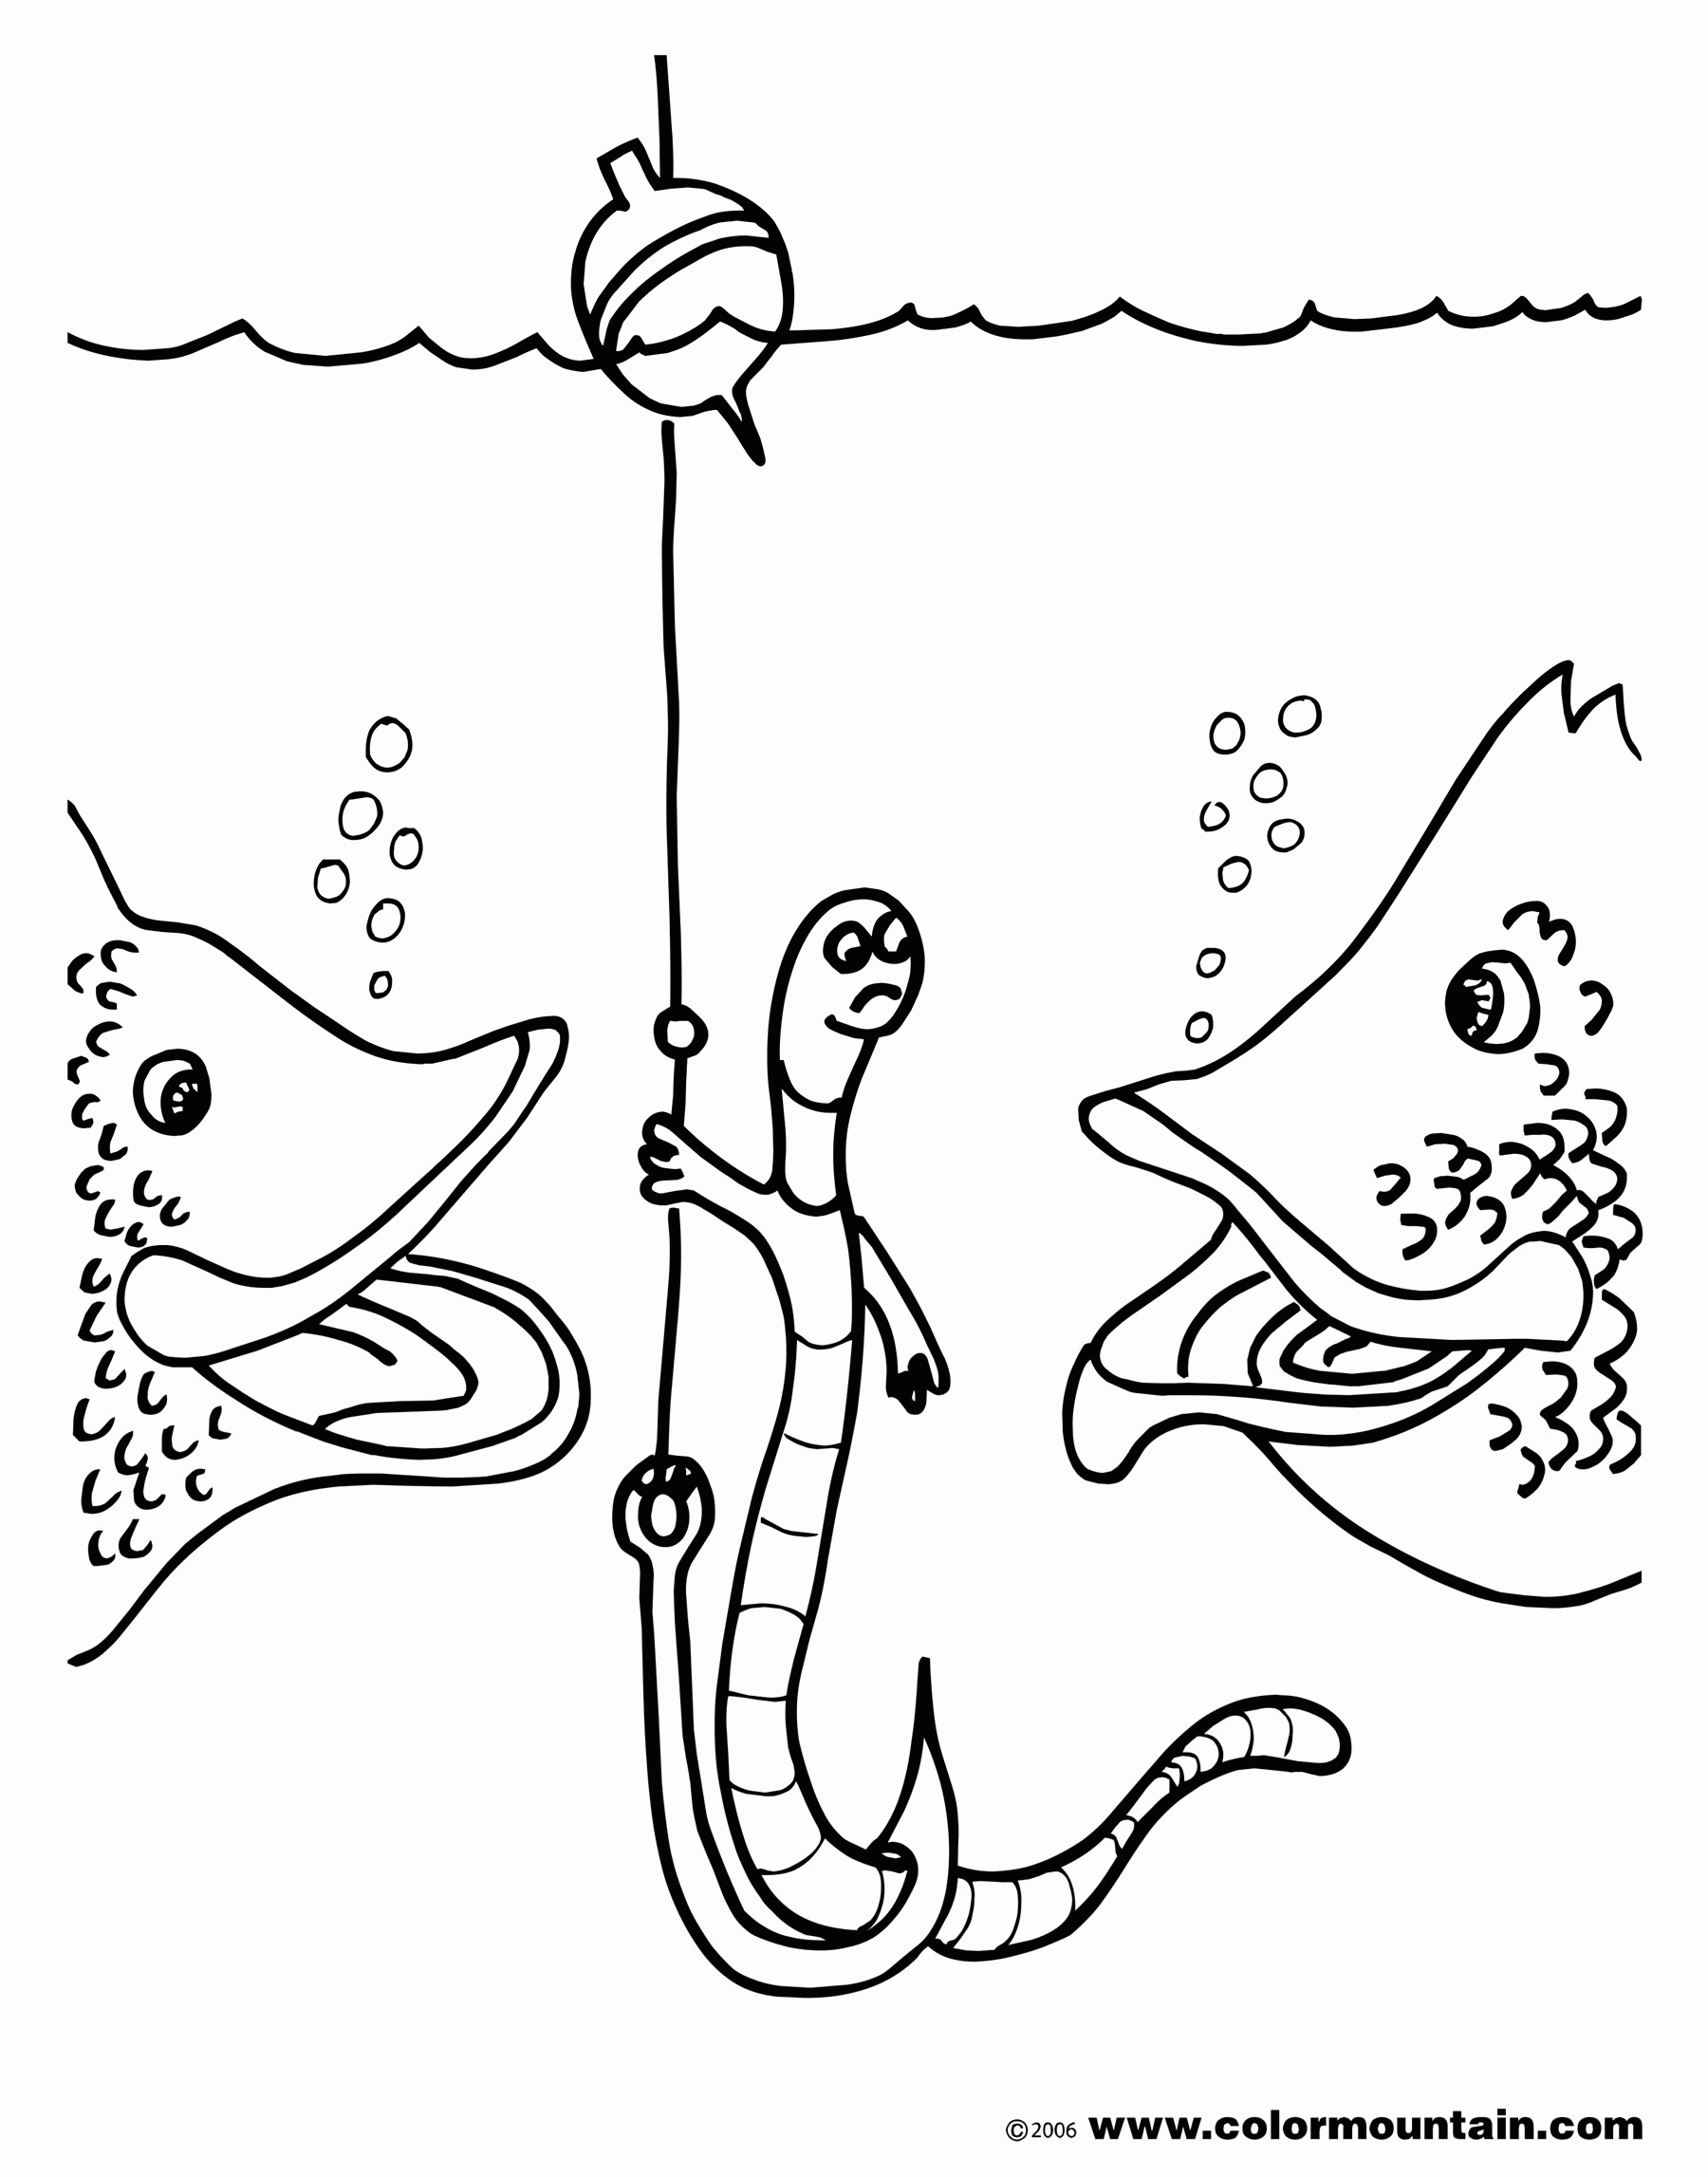 Worm Coloring Sheet - Create A Printout Or Activity